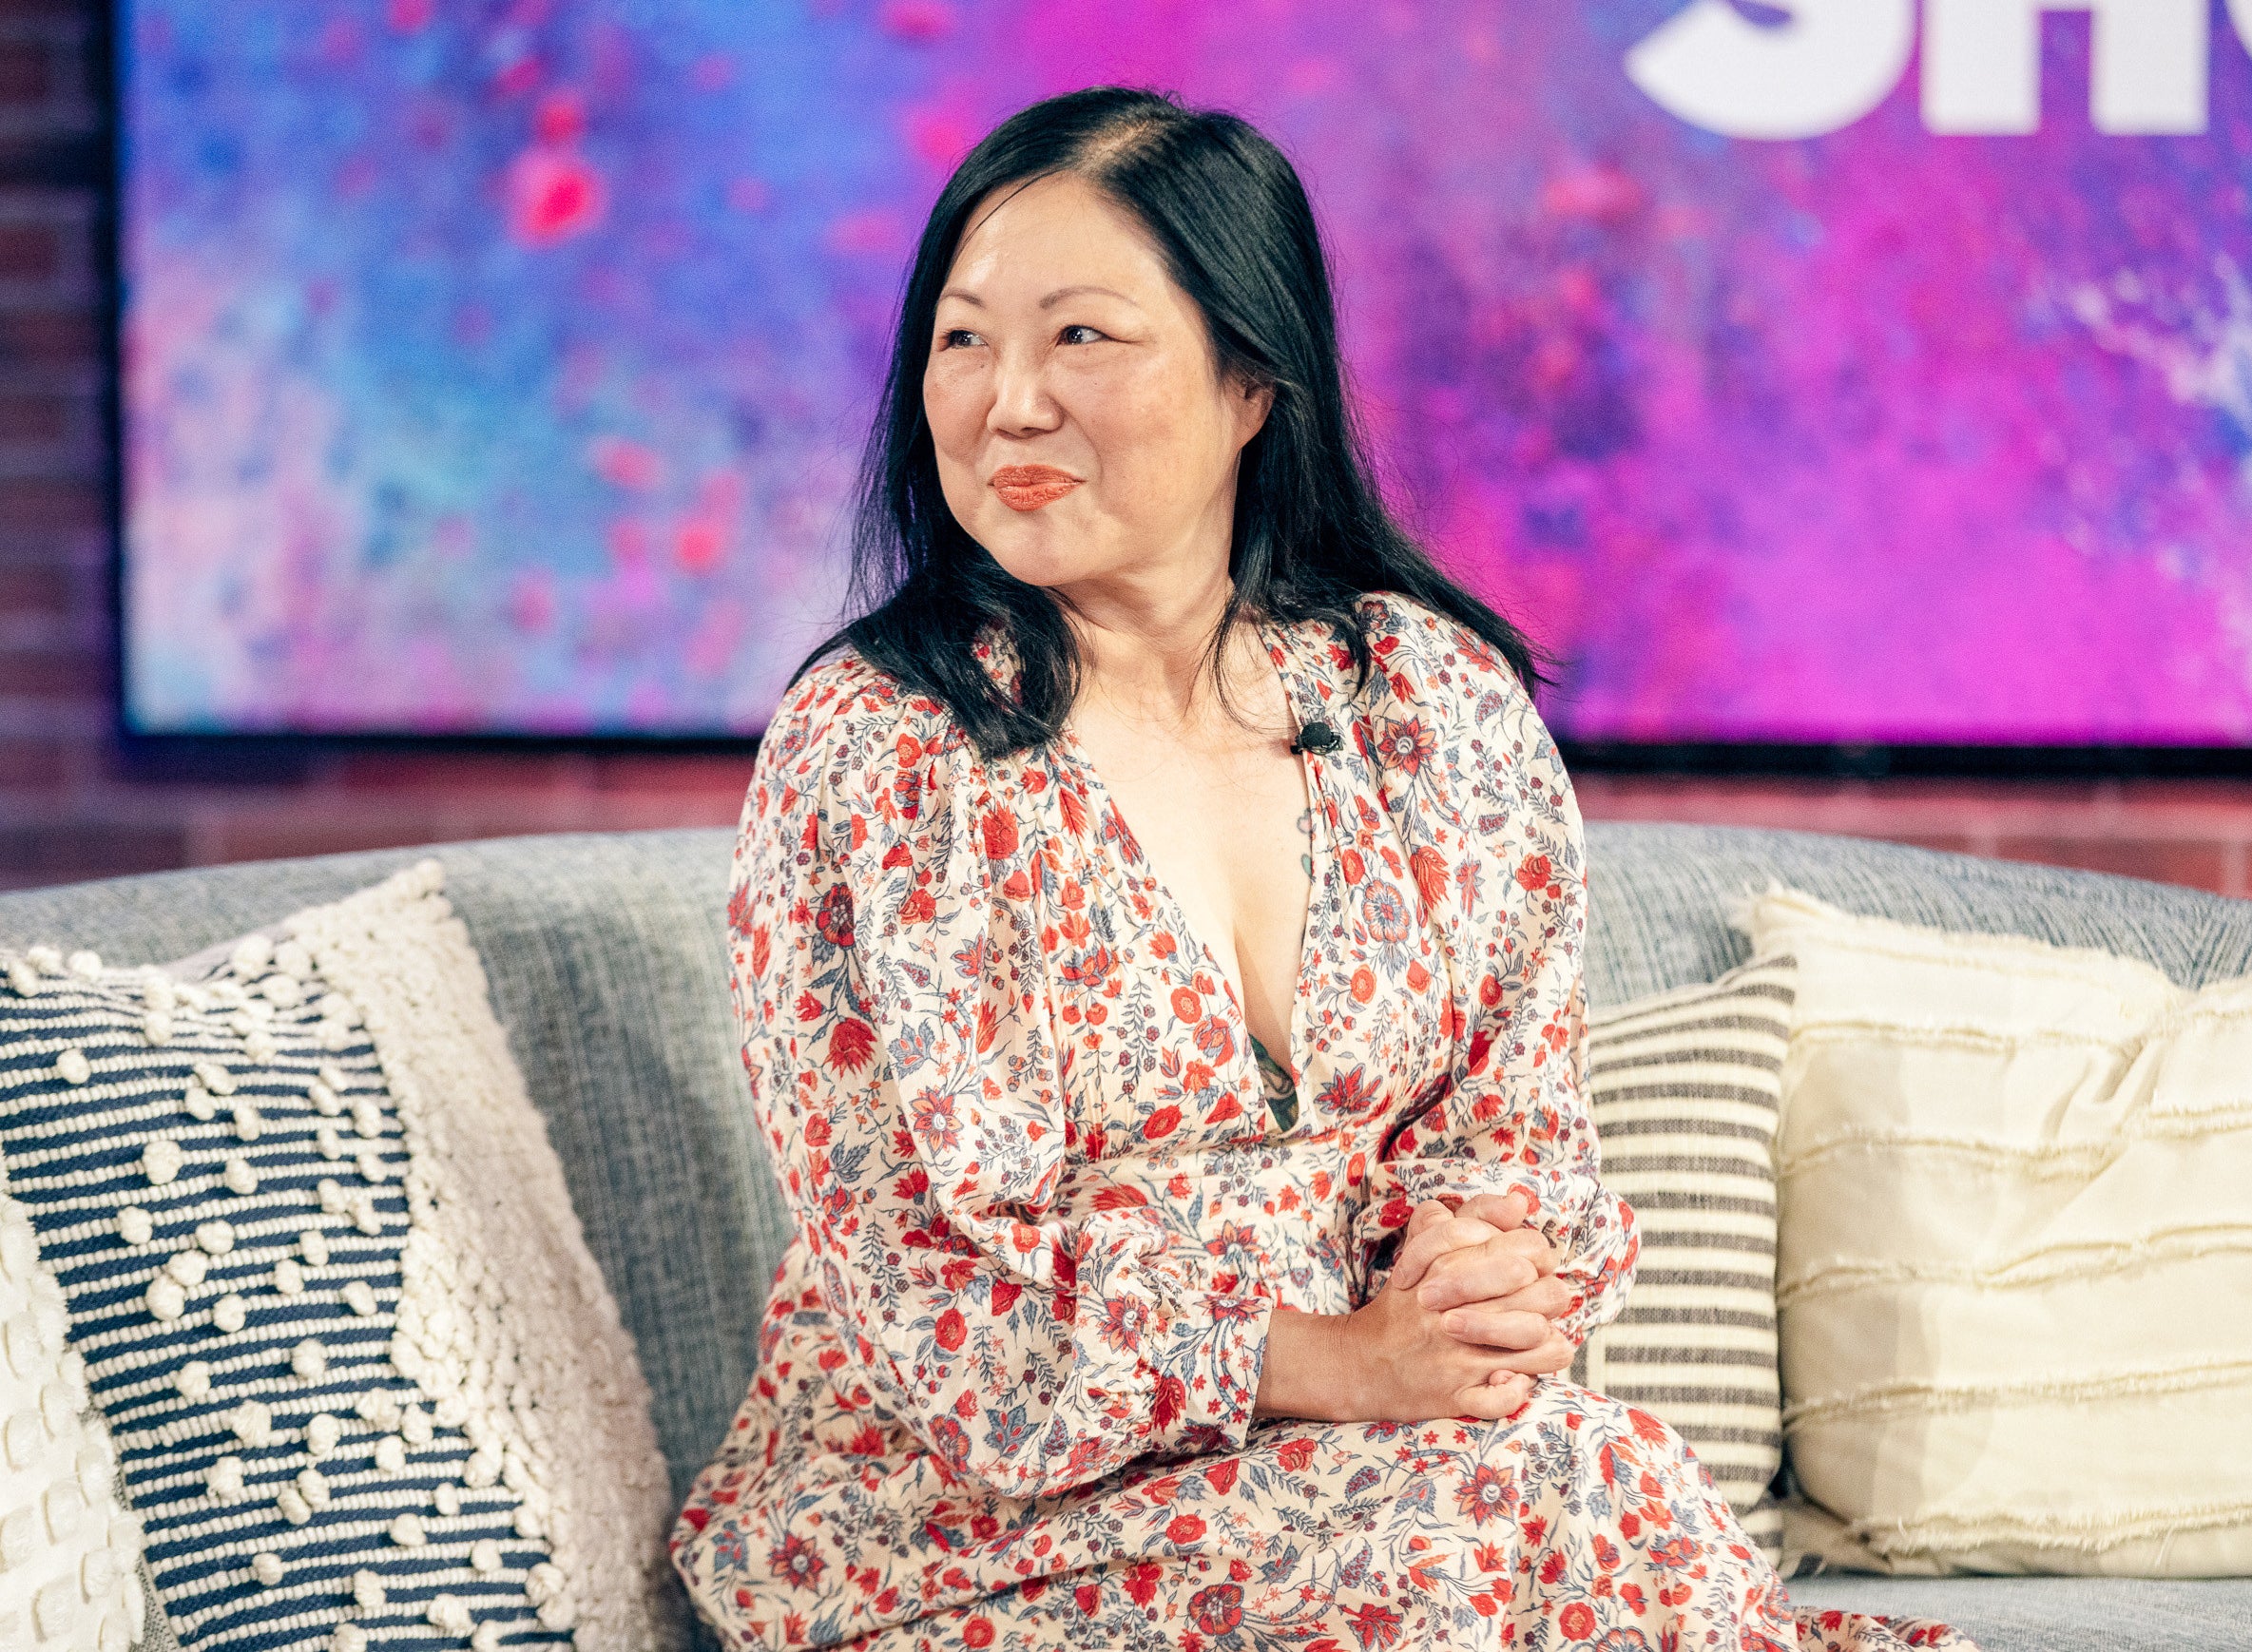 Margaret Cho on The Kelly Clarkson Show